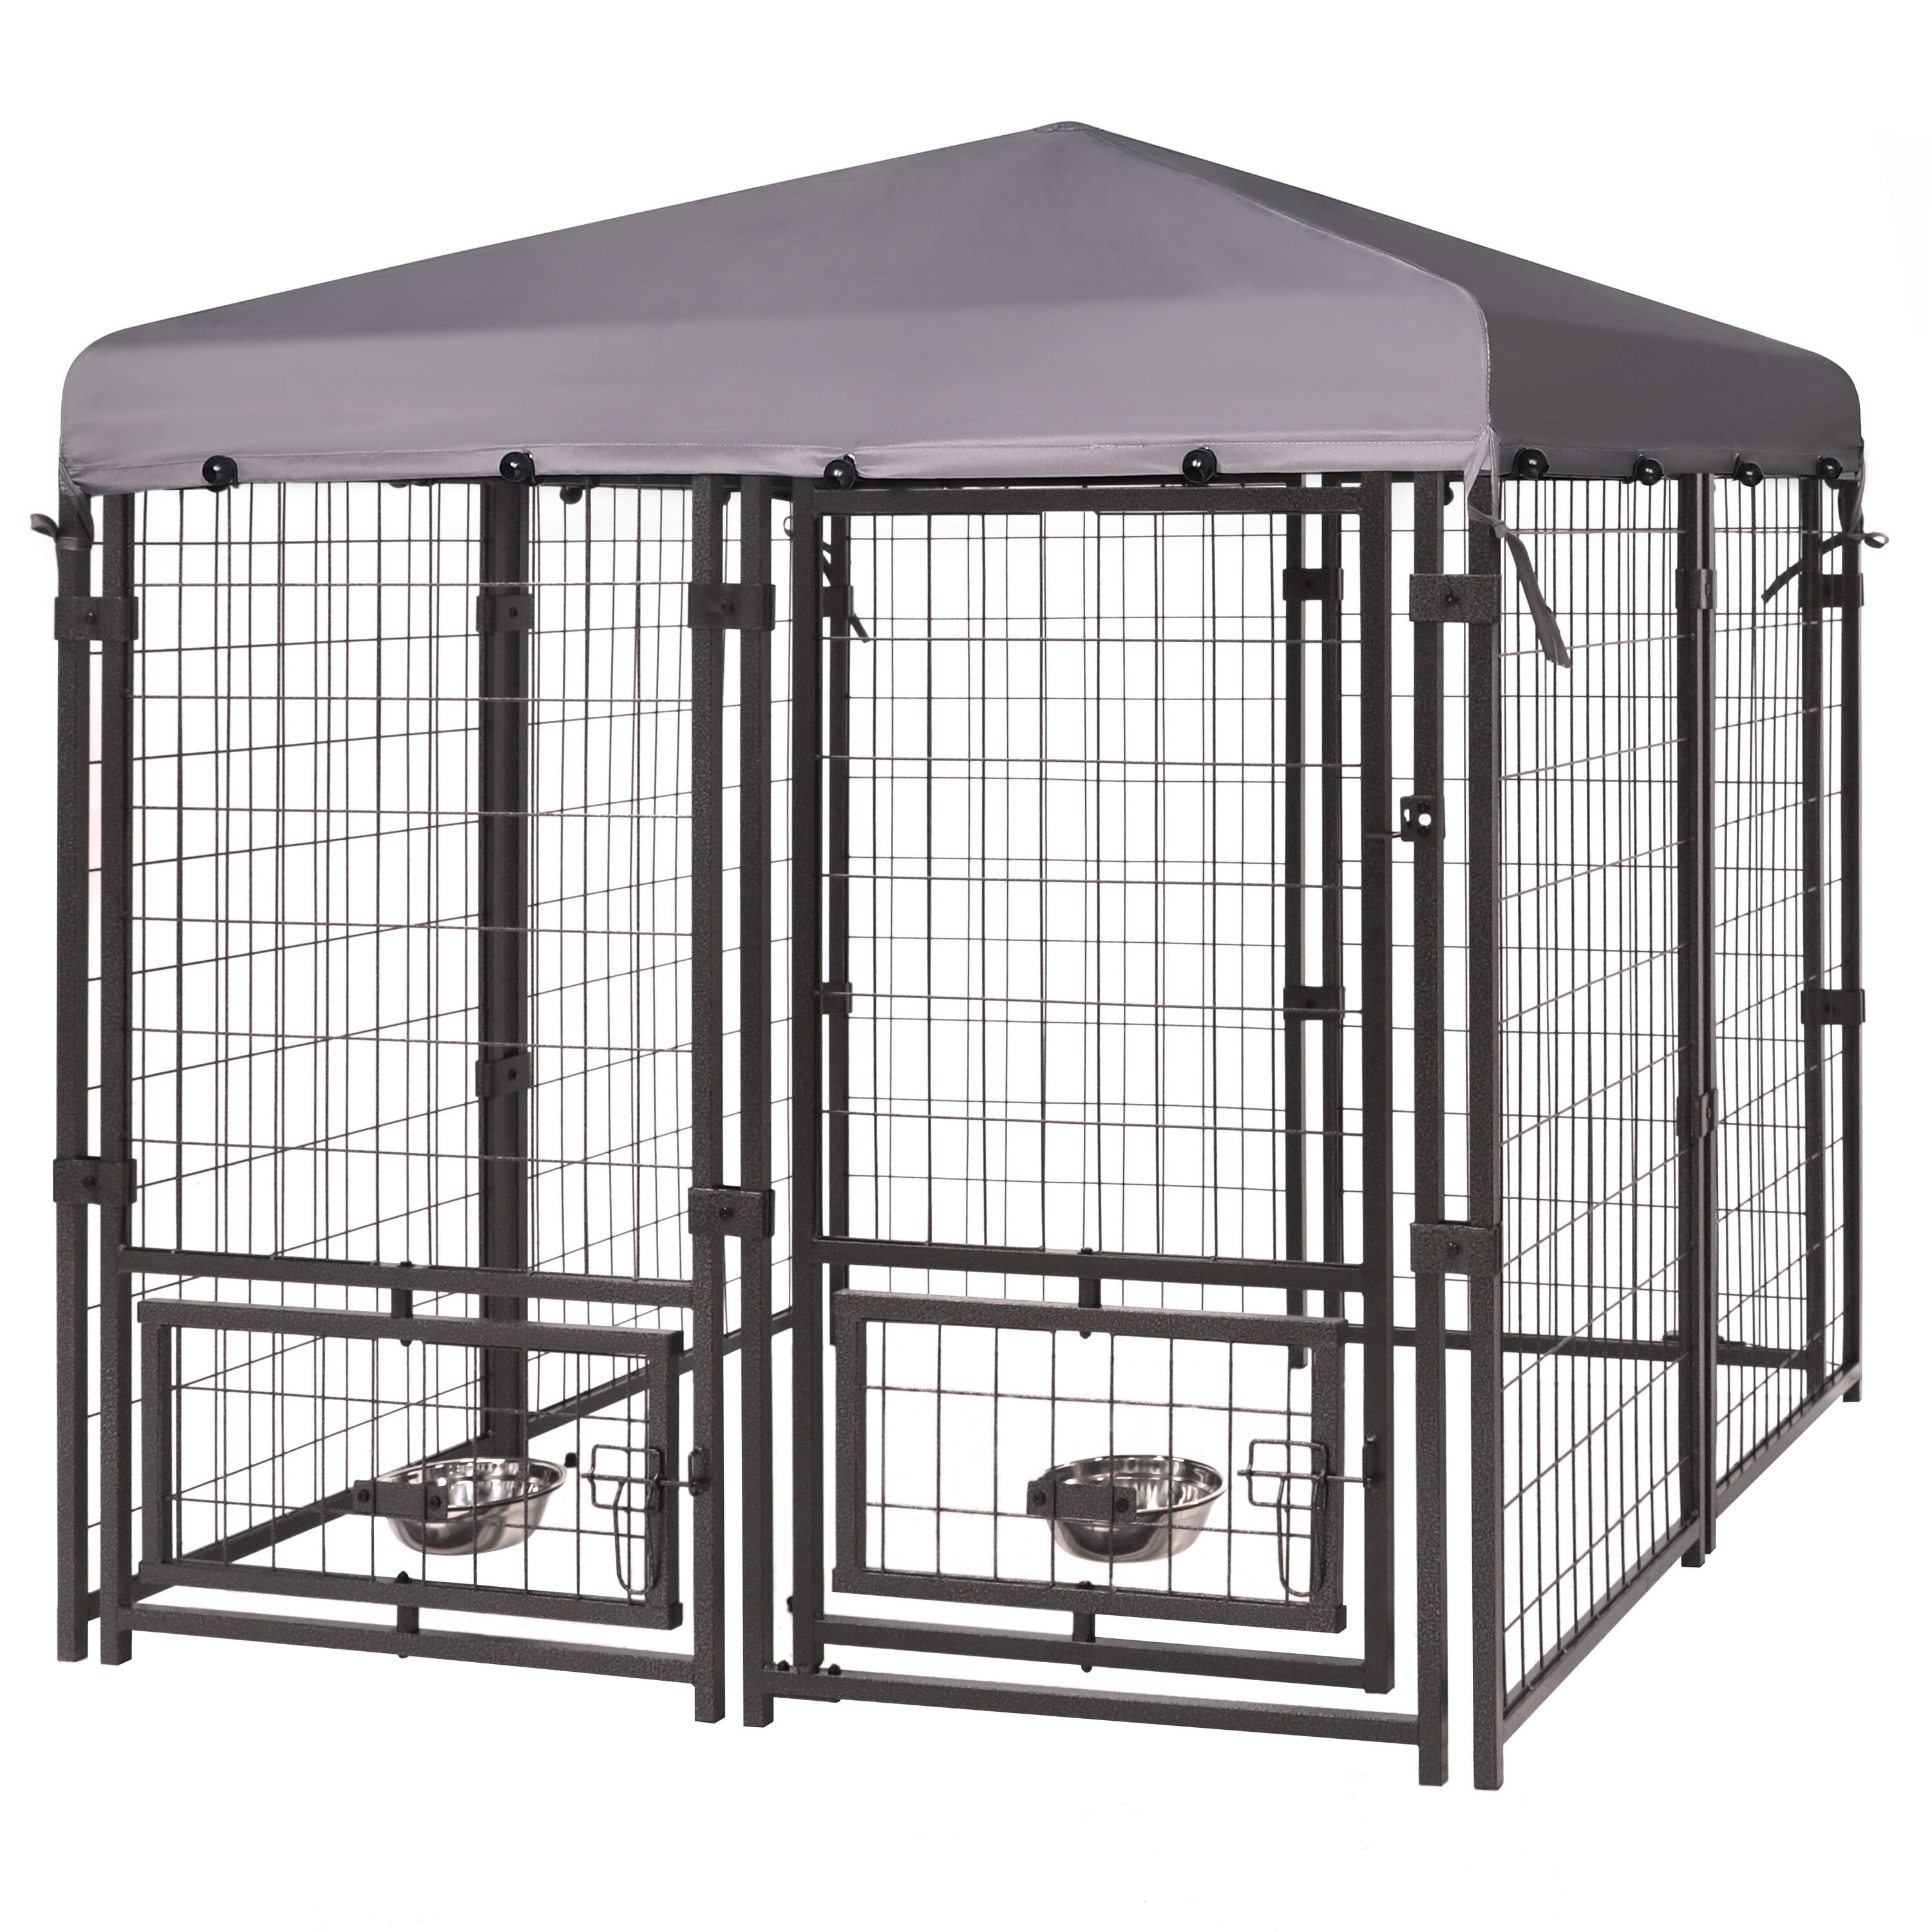 Aleko Dog Crate Furniture with Rotating Dog Bowls for Small/Medium Pet -30 lbs. Weathered Gray Free Rope Toy and Cushion